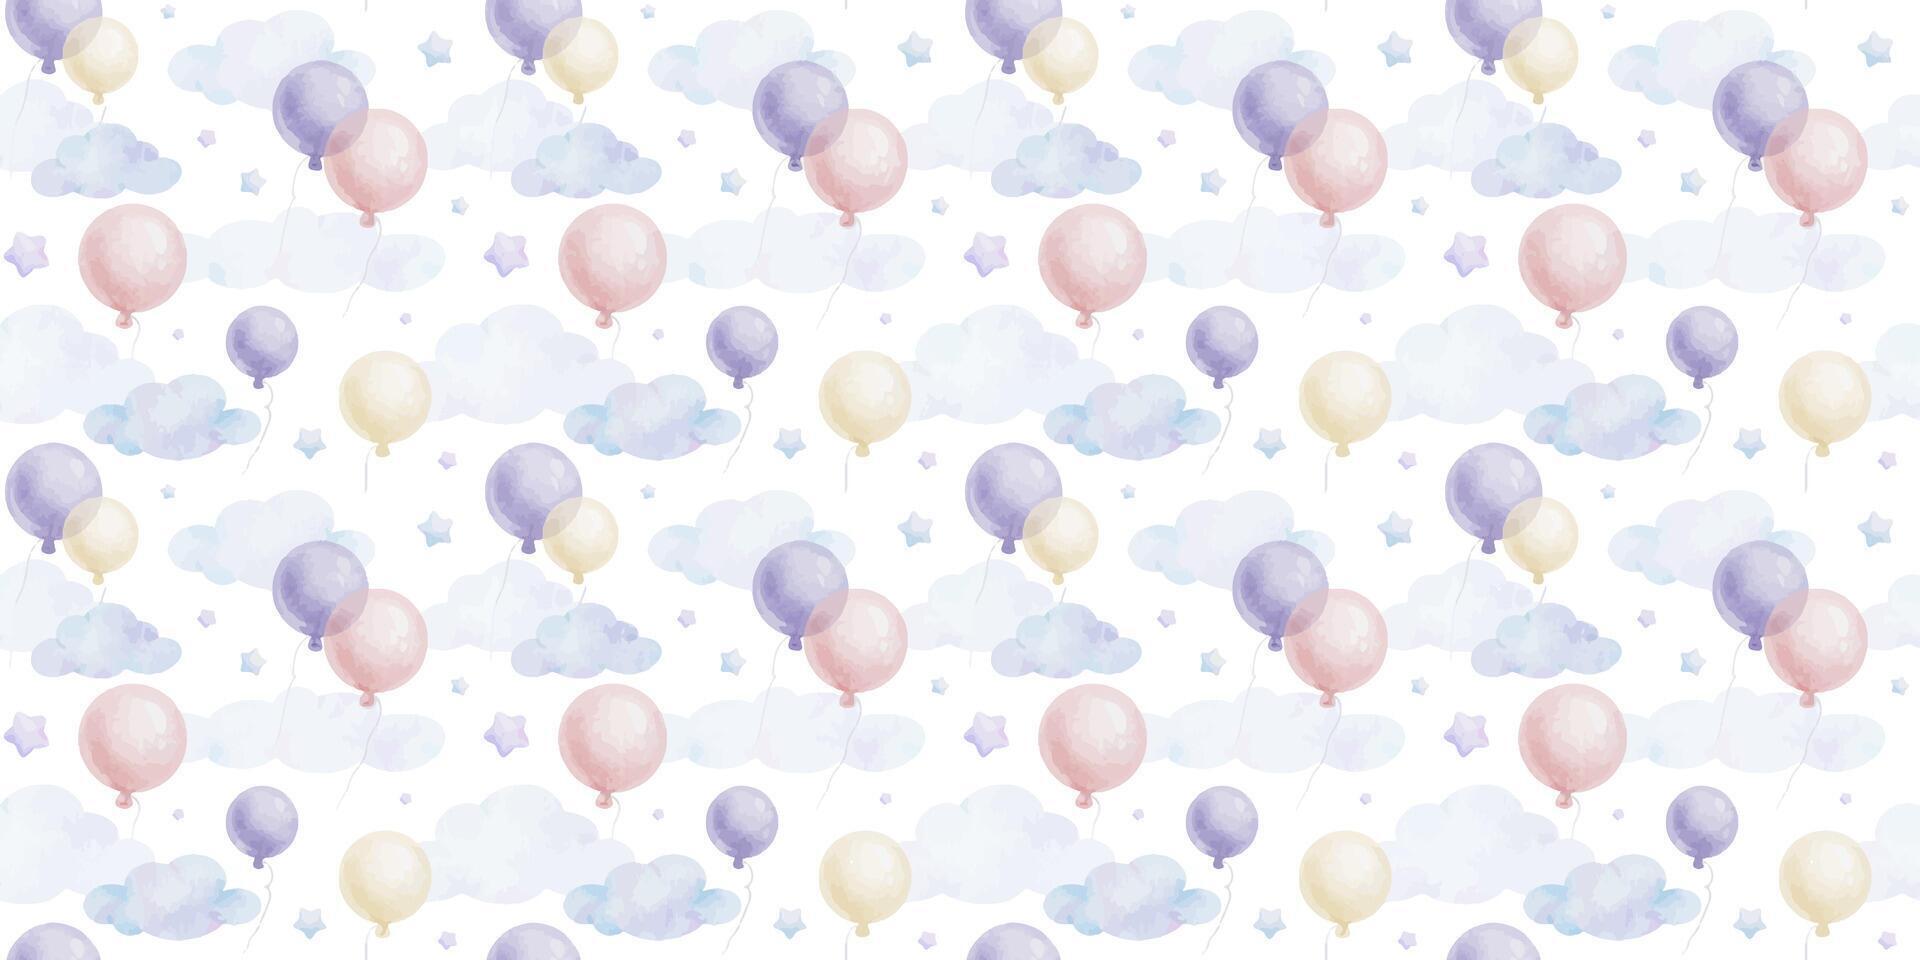 Flying round pink, purple balloons, stars, clouds. Cute baby's background. Watercolor seamless pattern of pastel color for children's good, baby's room design, invitation, kid's textile, clothing. vector